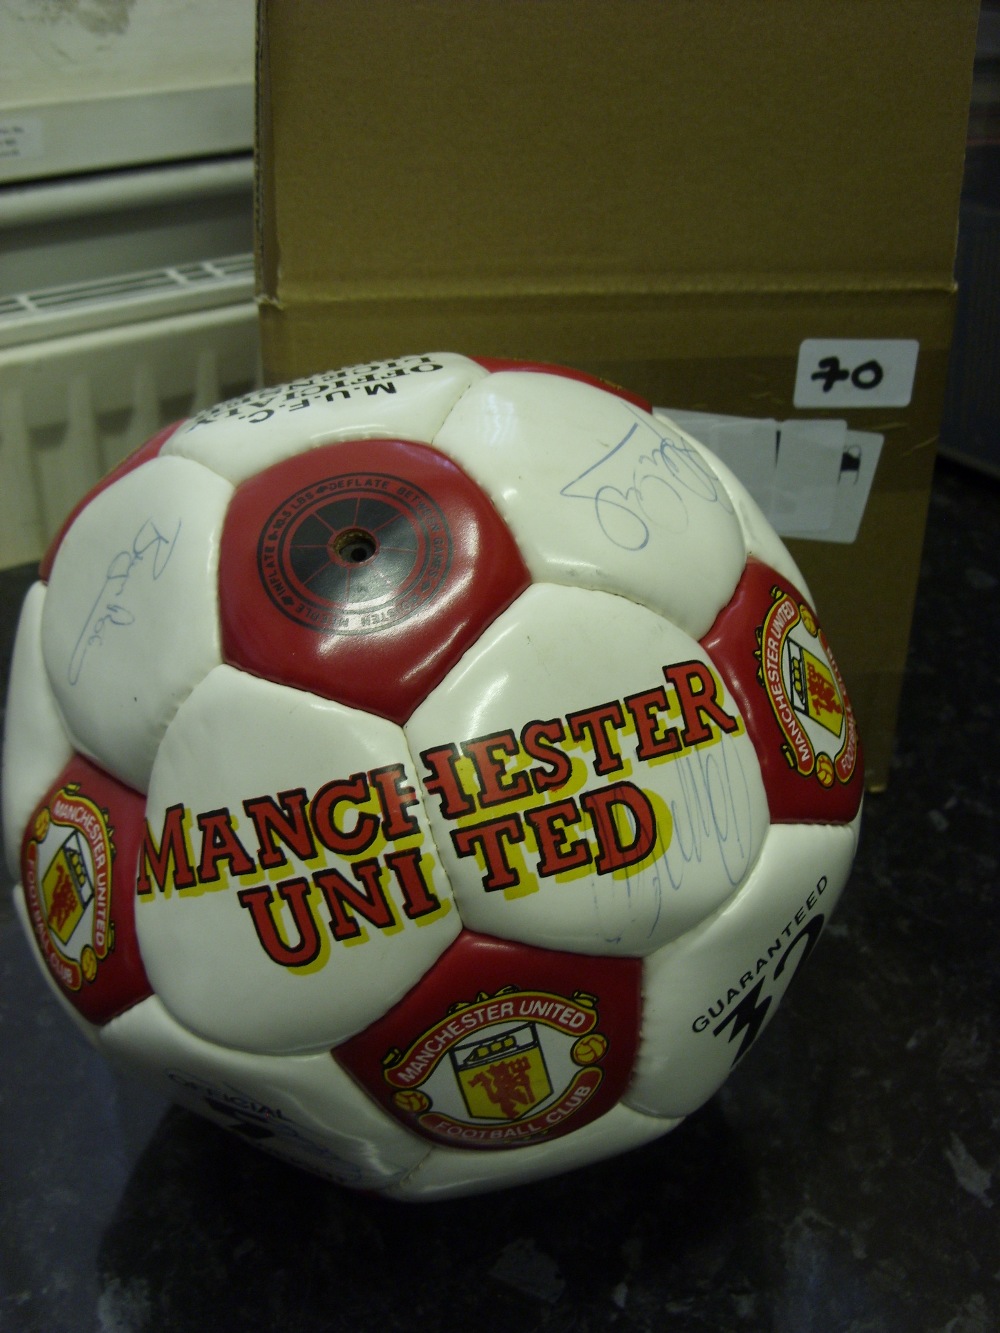 Manchester Utd, a modern football as officially licensed by the club, with over 15 signatures in